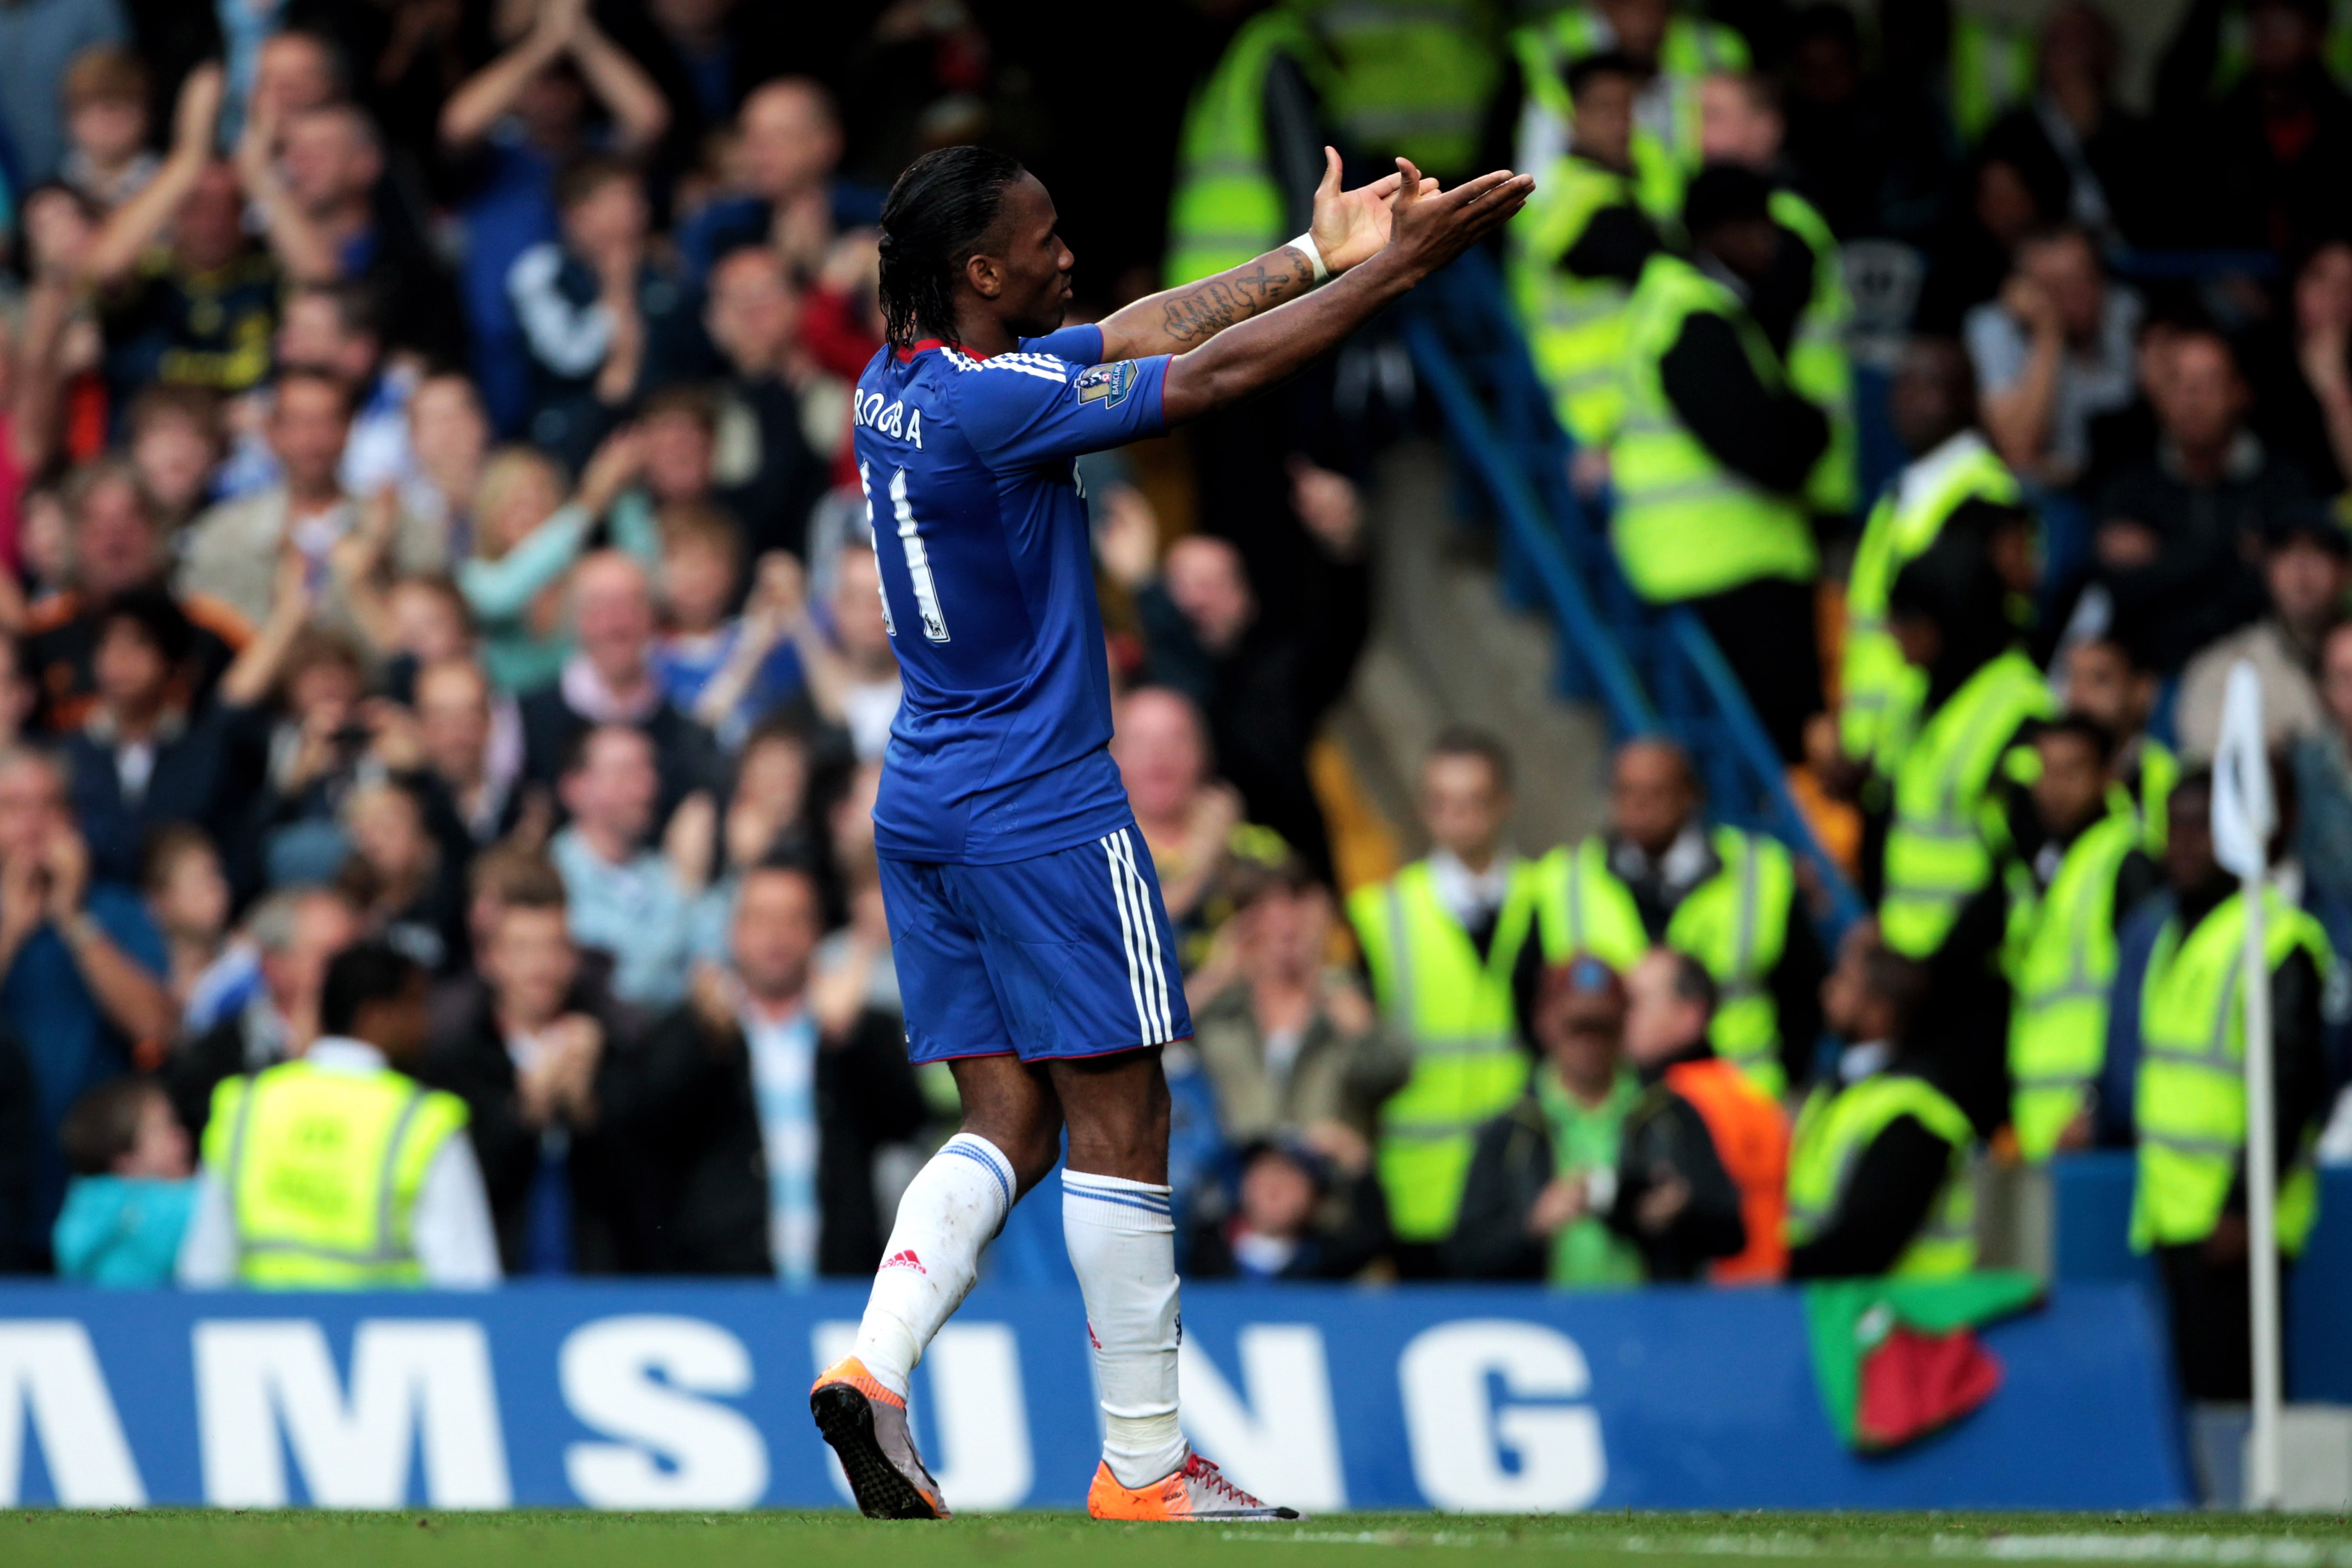 LONDON, ENGLAND - AUGUST 14:  Didier Drogba #11 celebrates after scoring his team's second goal during the Barclays Premier League match between Chelsea and West Bromwich Albion at Stamford Bridge on August 14, 2010 in London, England.  (Photo by Phil Col